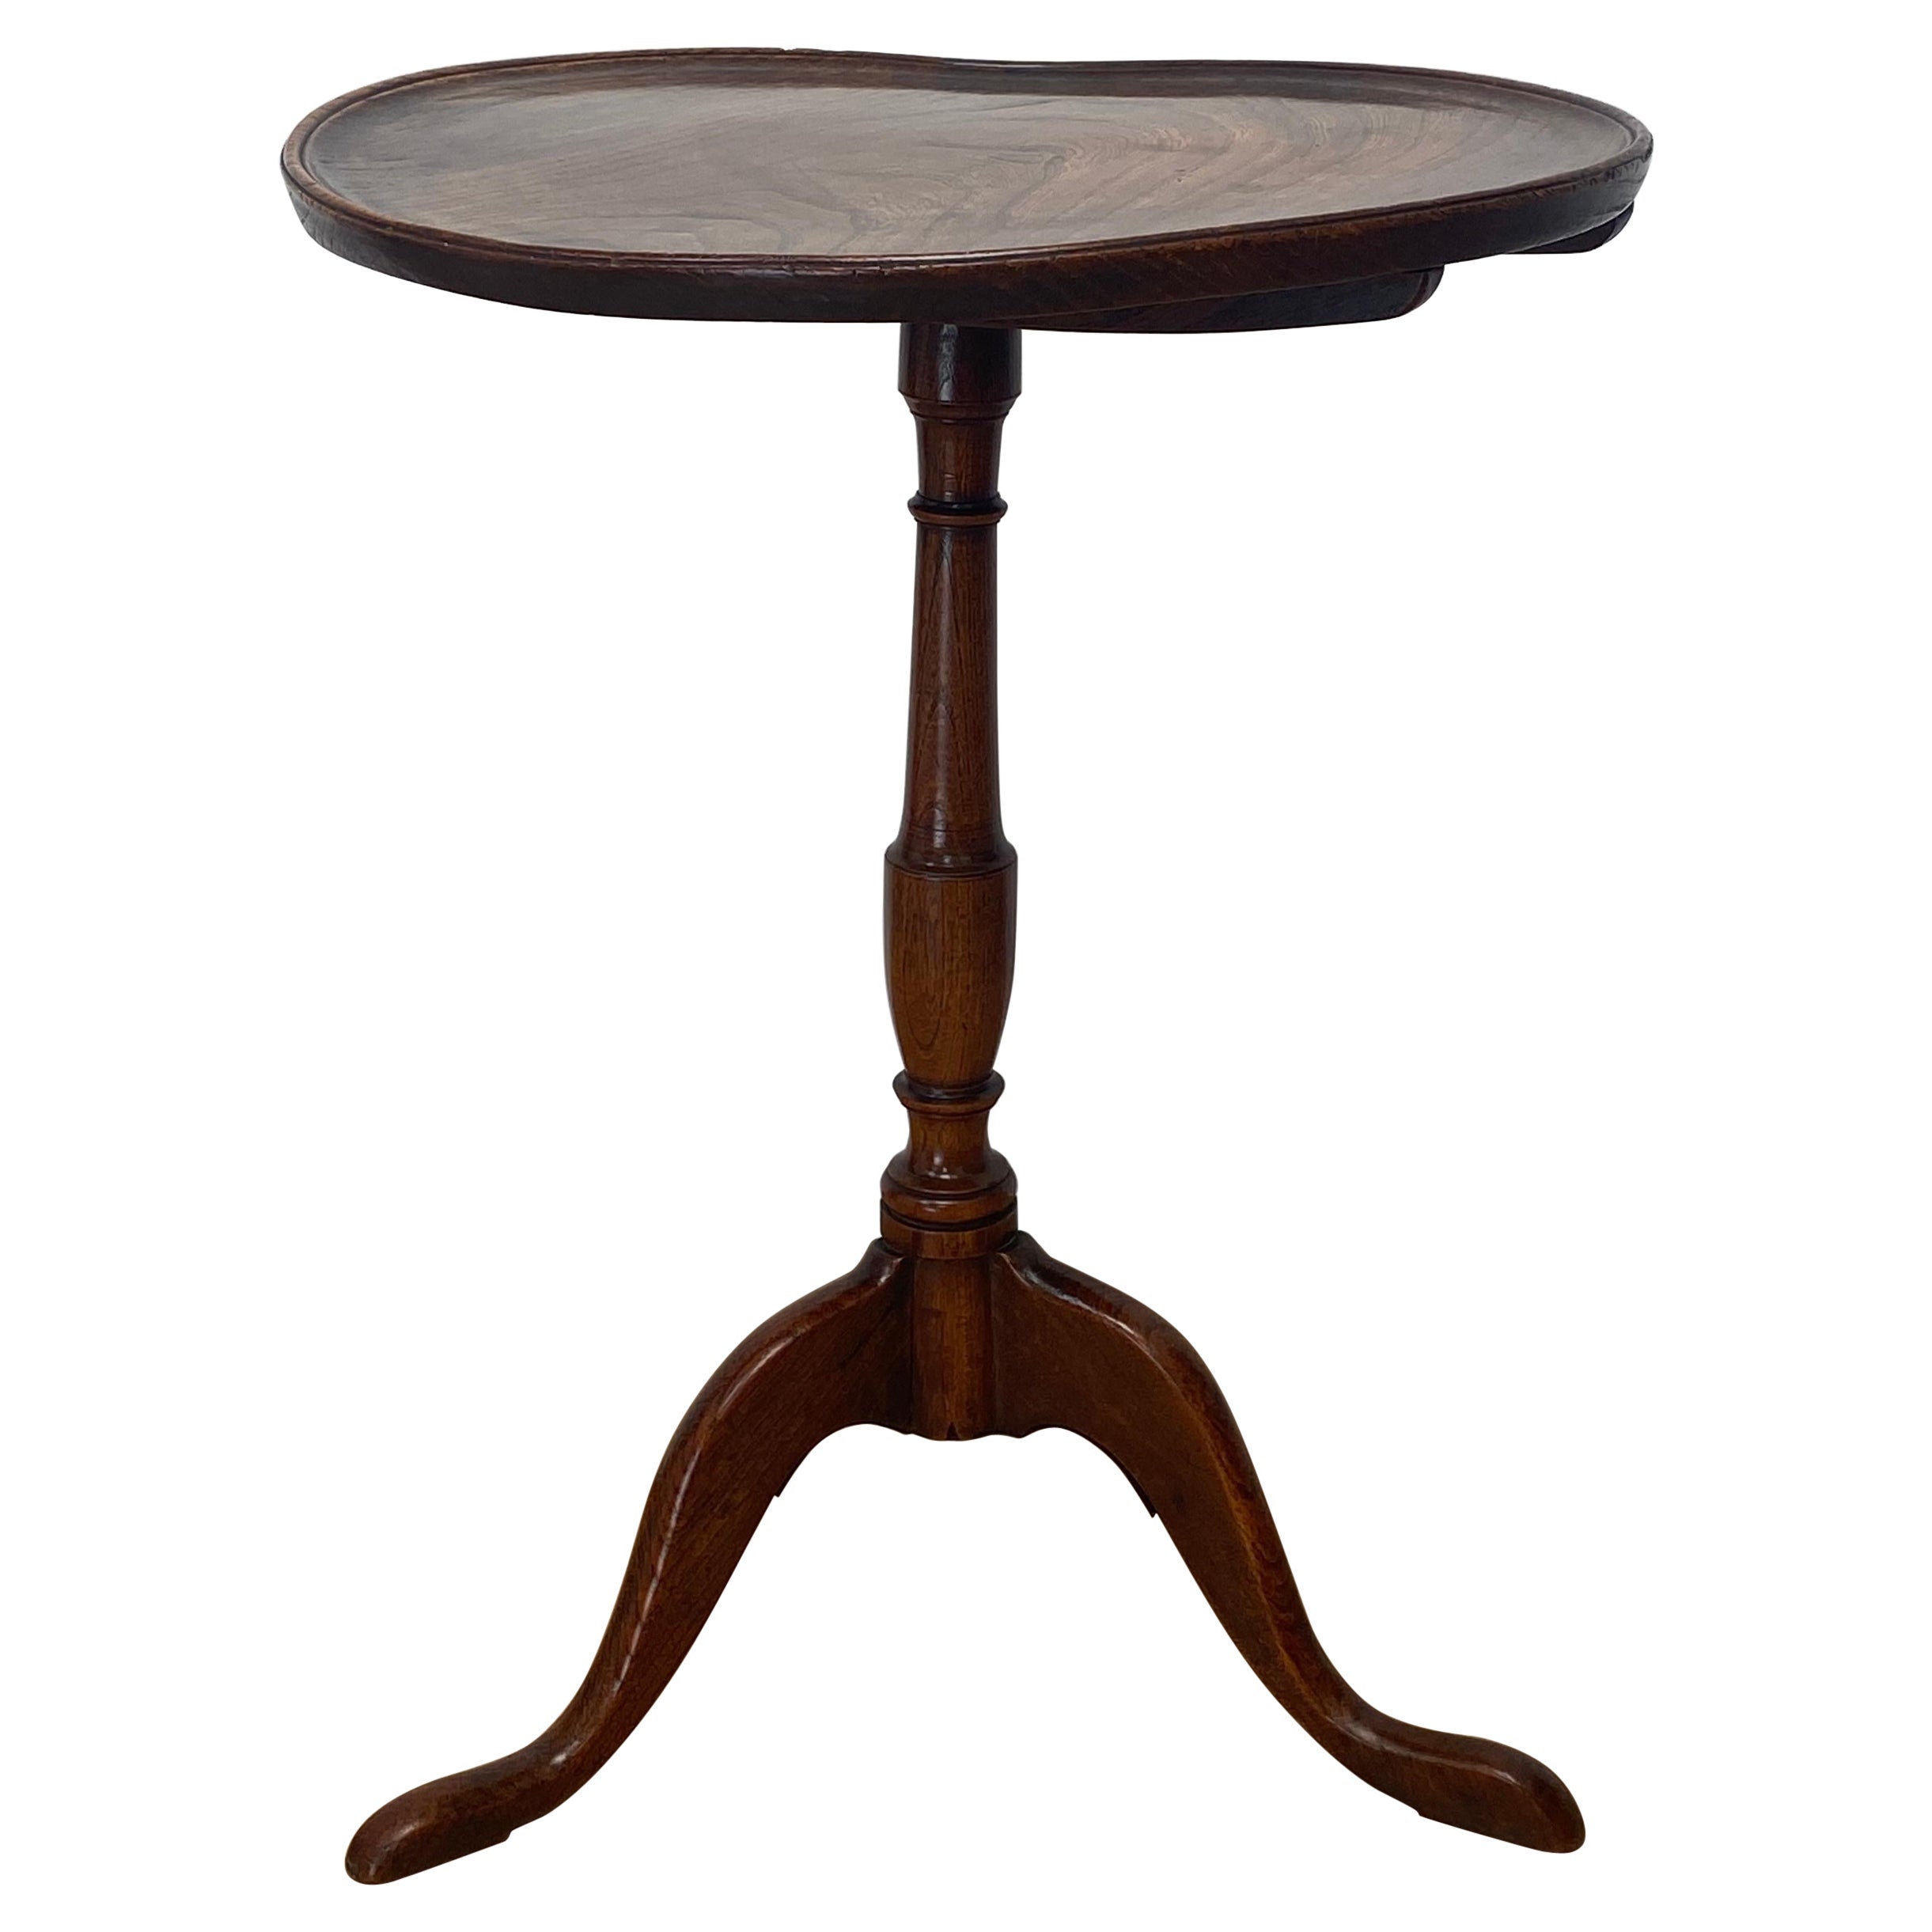 Antique , English Tripod Table in Elm Wood